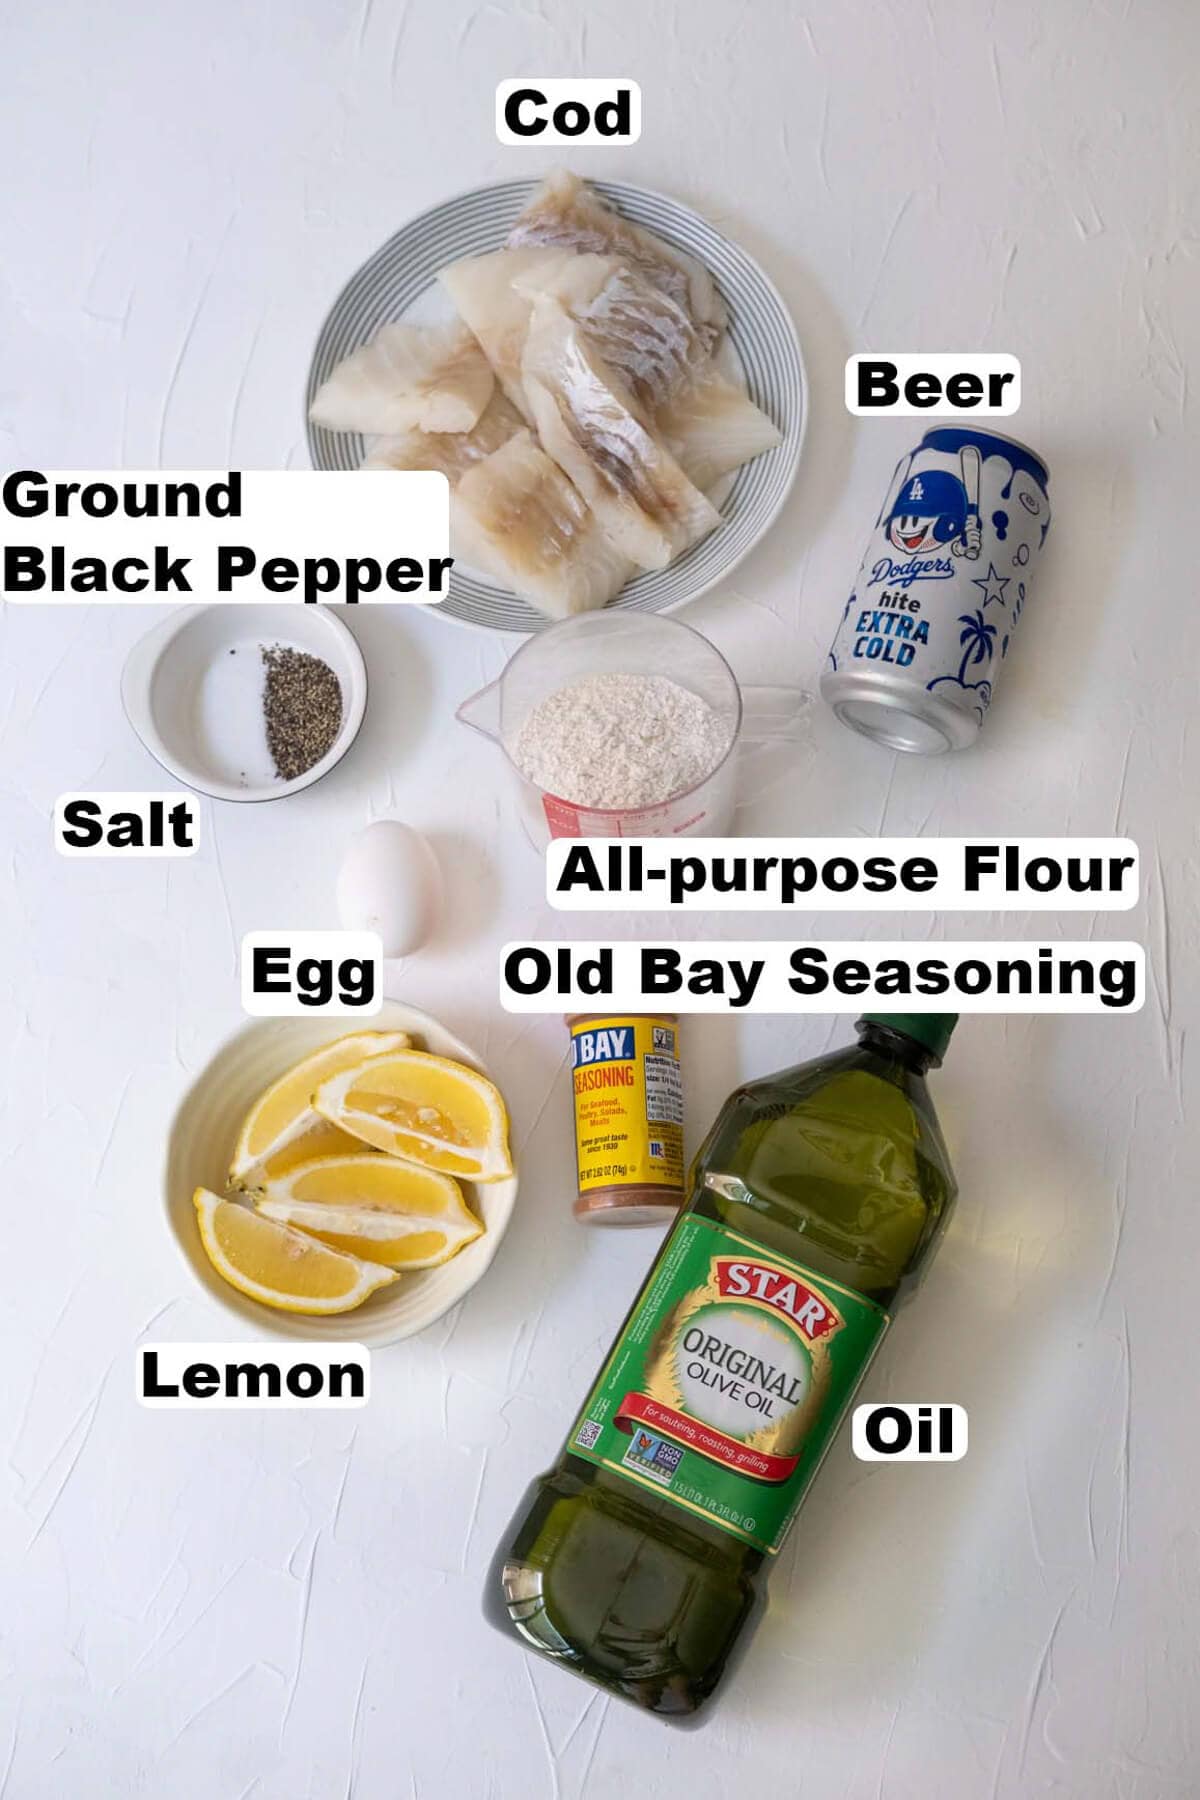 Ingredients for beer-battered fish recipe.